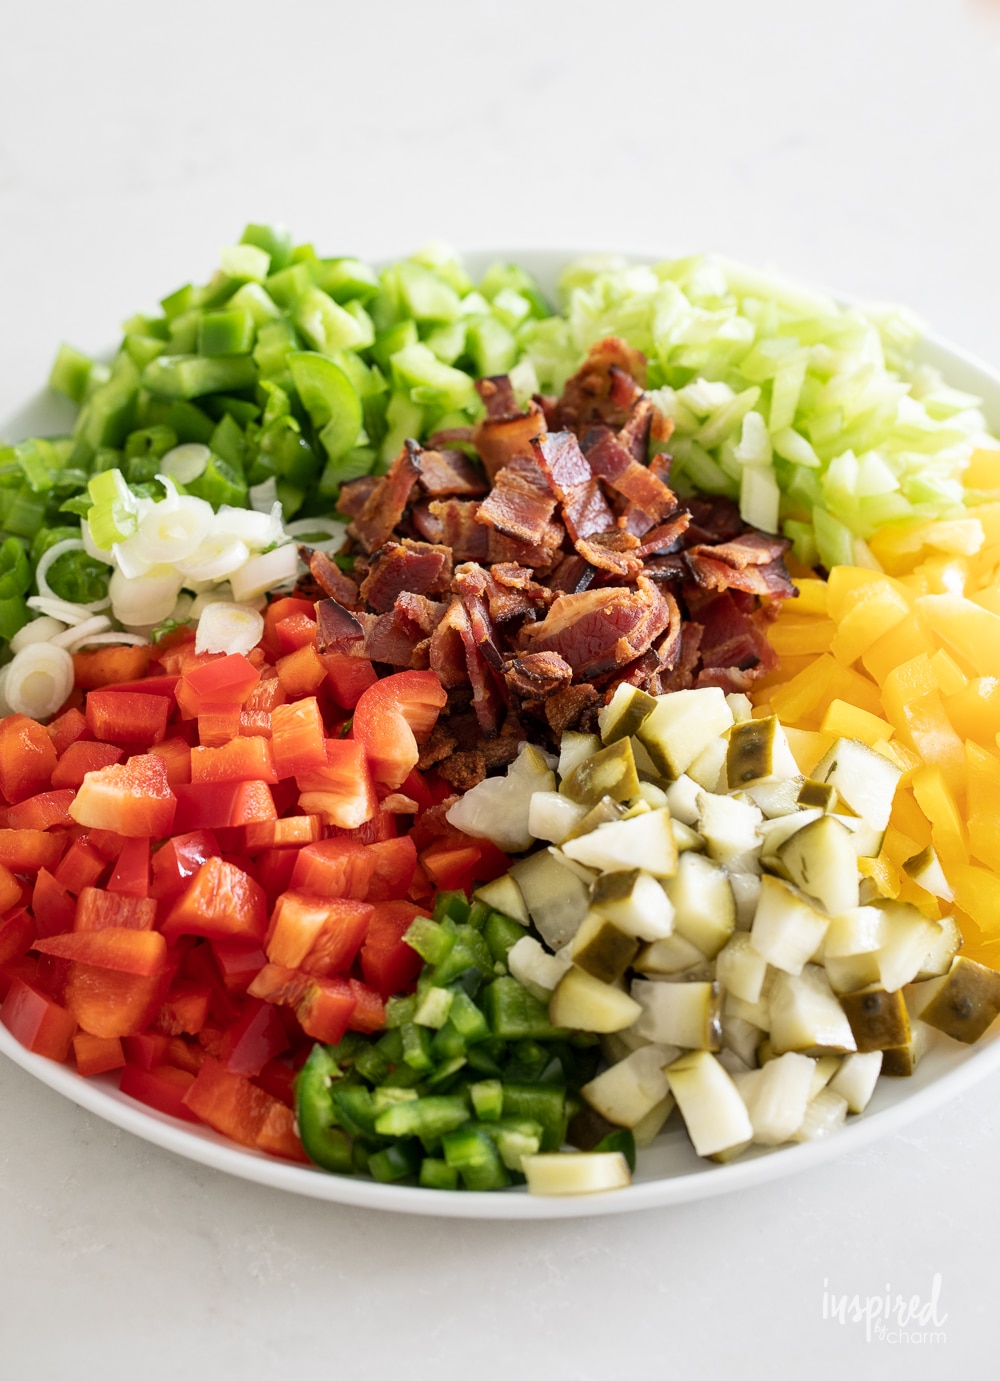 cajun potato salad ingredients arranged in groups on a plate.